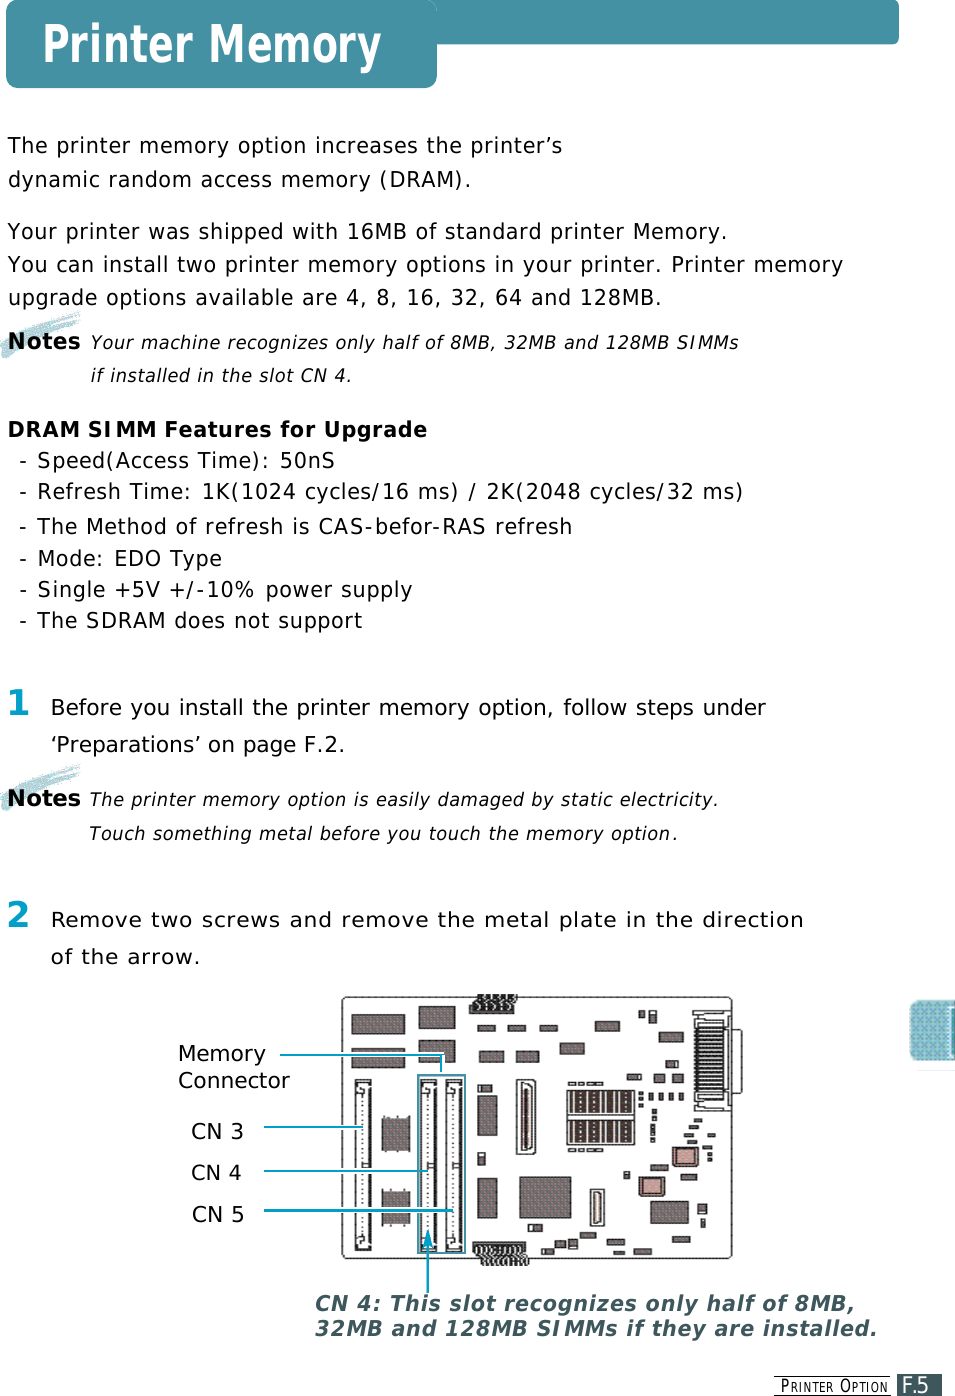 PR I N T E R OP T I O NF.5Printer Memory2Re m ove two screws and remove the metal plate in the direction of the arrow.CN 4: This slot recognizes only half of 8MB,32MB and 128MB SIMMs if they are installed. MemoryConnectorCN 3CN 4CN 5The printer memory option increases the printer’s dynamic random access memory (DRAM).Your printer was shipped with 16MB of standard printer Memory.You can install two printer memory options in your printer. Printer memoryu p g rade options available are 4, 8, 16, 32, 64 and 128MB.Notes Your machine recognizes only half of 8MB, 32MB and 128MB SIMMs if installed in the slot CN 4.DRAM SIMM Features for Upgrade- Speed(Access Time): 50nS- Refresh Time: 1K(1024 cycles/16 ms) / 2K(2048 cycles/32 ms)- The Method of refresh is CAS - b e f o r- R AS refresh- Mode: EDO Ty p e- Single +5V +/-10% power supply- The SDRAM does not support1Before you install the printer memory option, follow steps under ‘Preparations’ on page F.2.Notes The printer memory option is easily damaged by static electricity. Touch something metal before you touch the memory option.